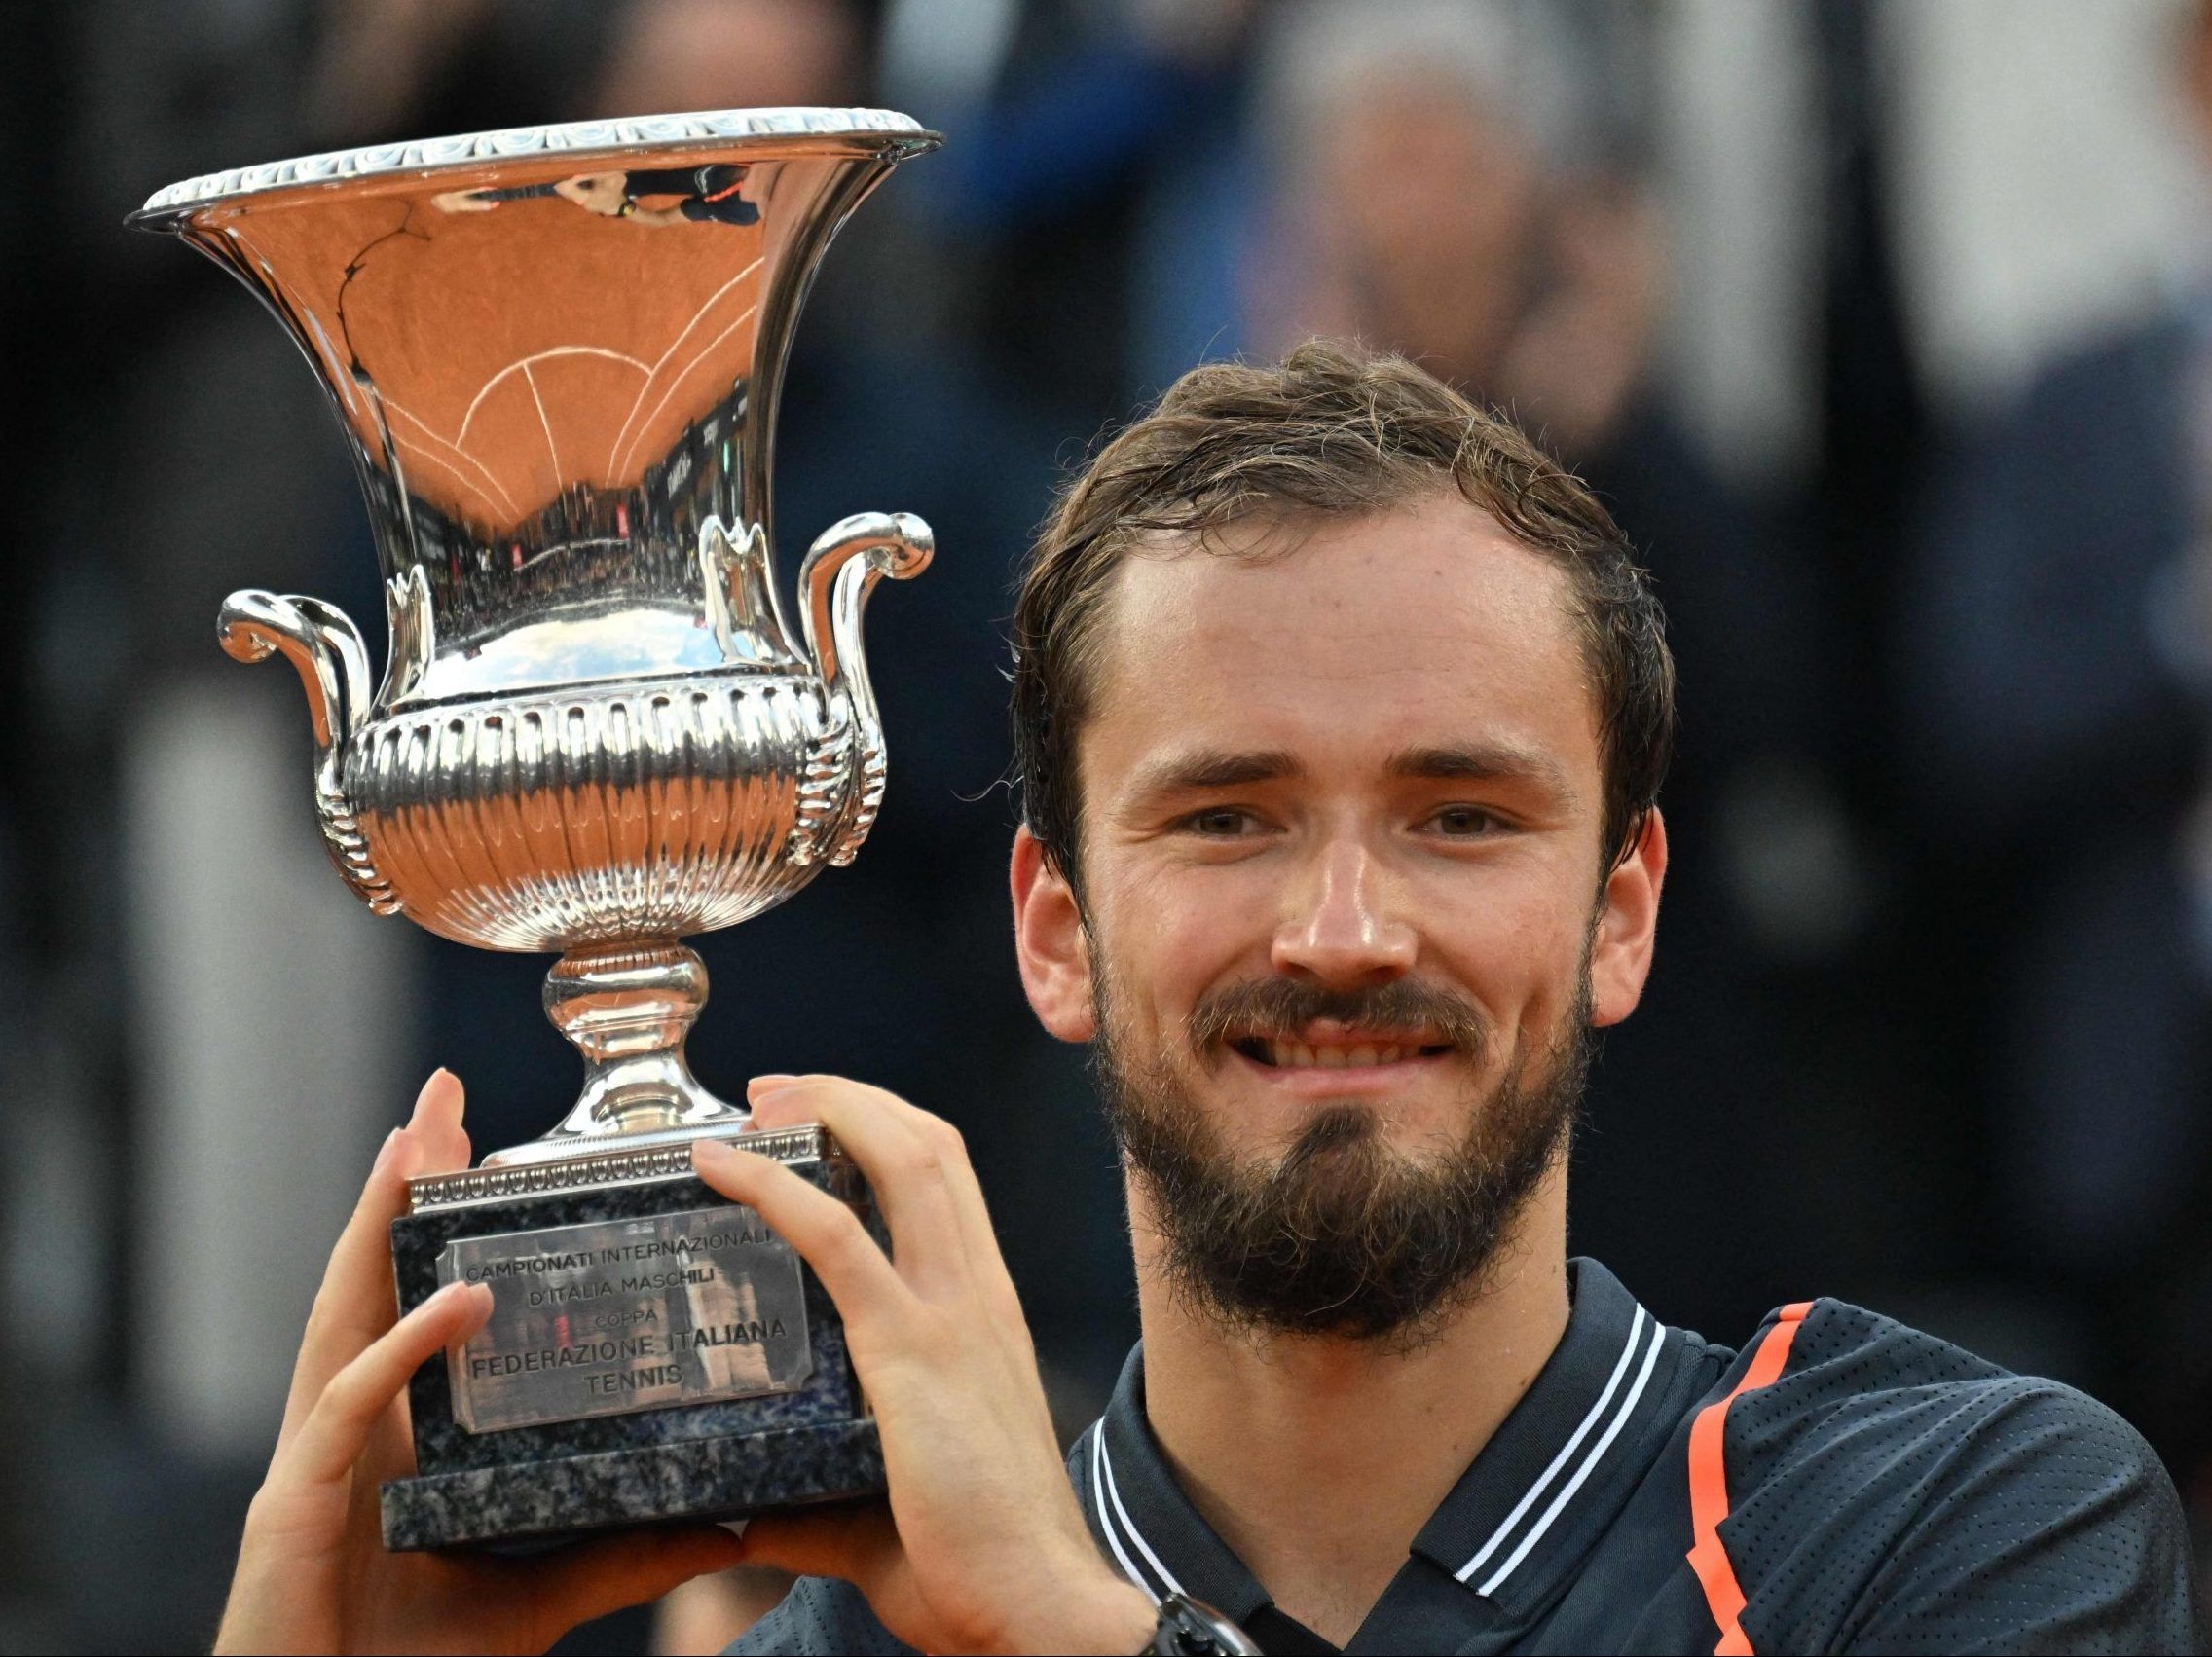 Medvdev wins Italian Open for the first time